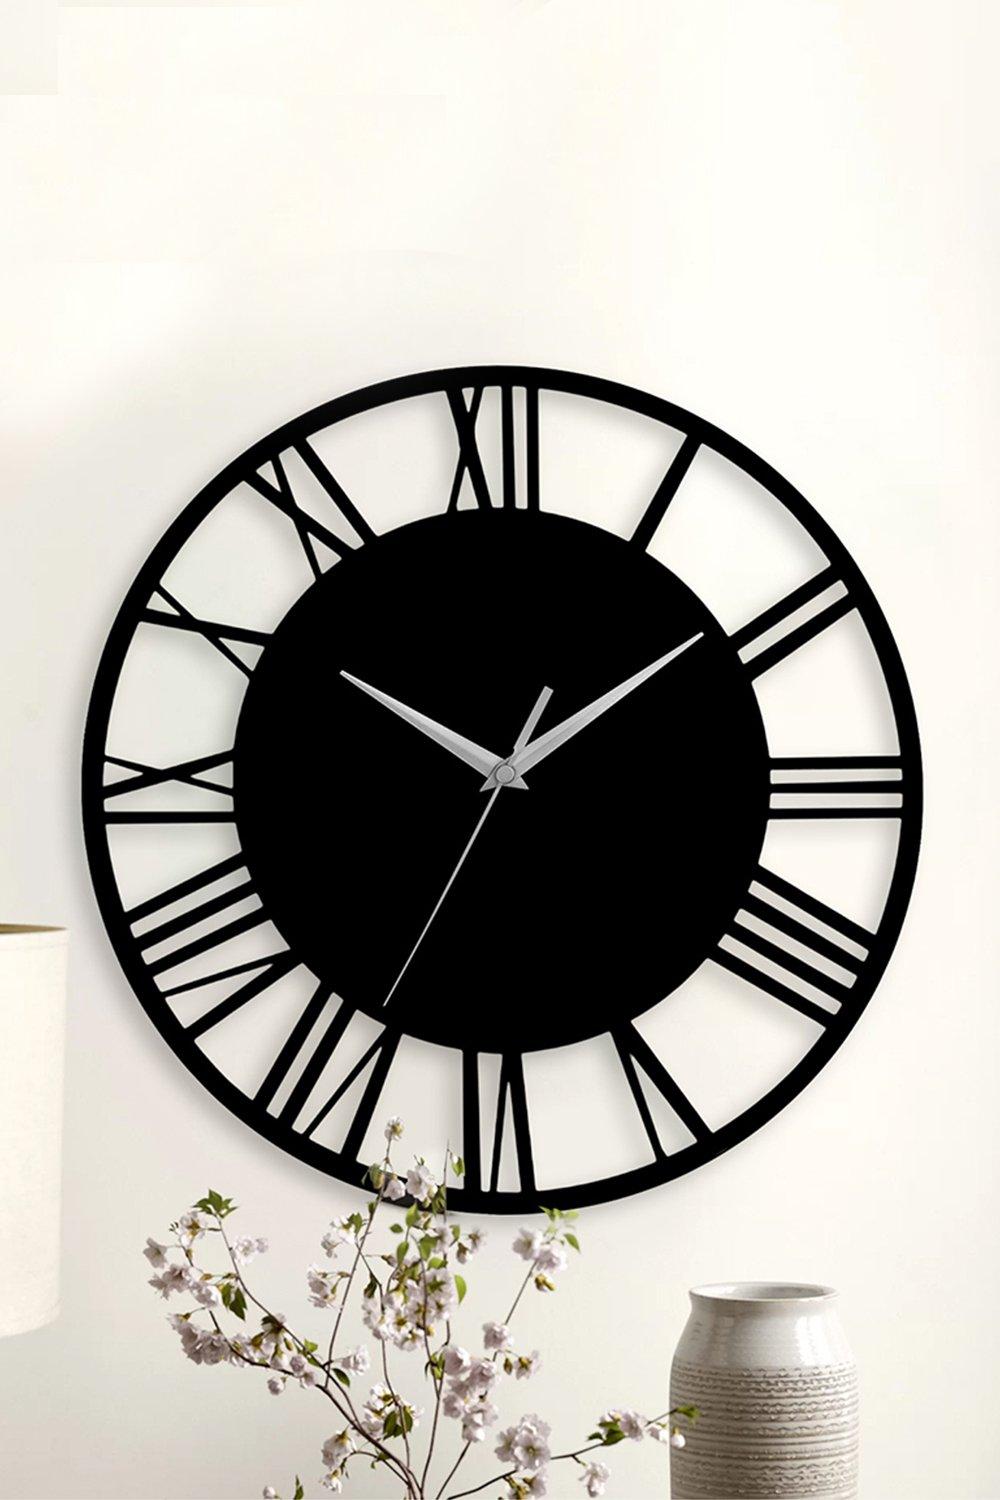 30 cm Dia Black Round Wooden Roman Numeral Wall Clock with Silver Needle